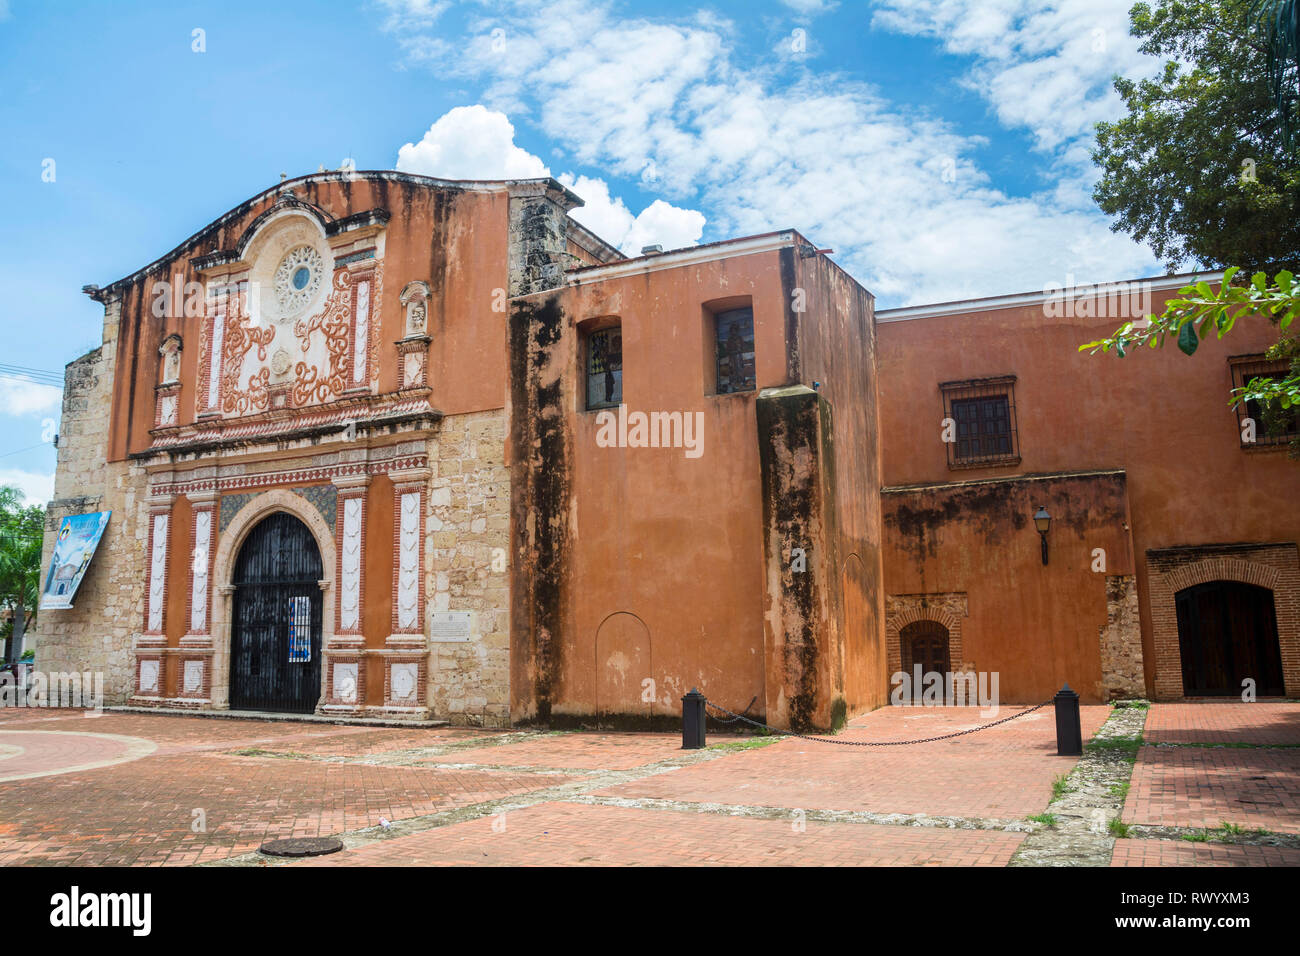 The Church and Convent of the Dominicans is the oldest Catholic building in the American Continent, being the first in the New World and in Santo Domi Stock Photo